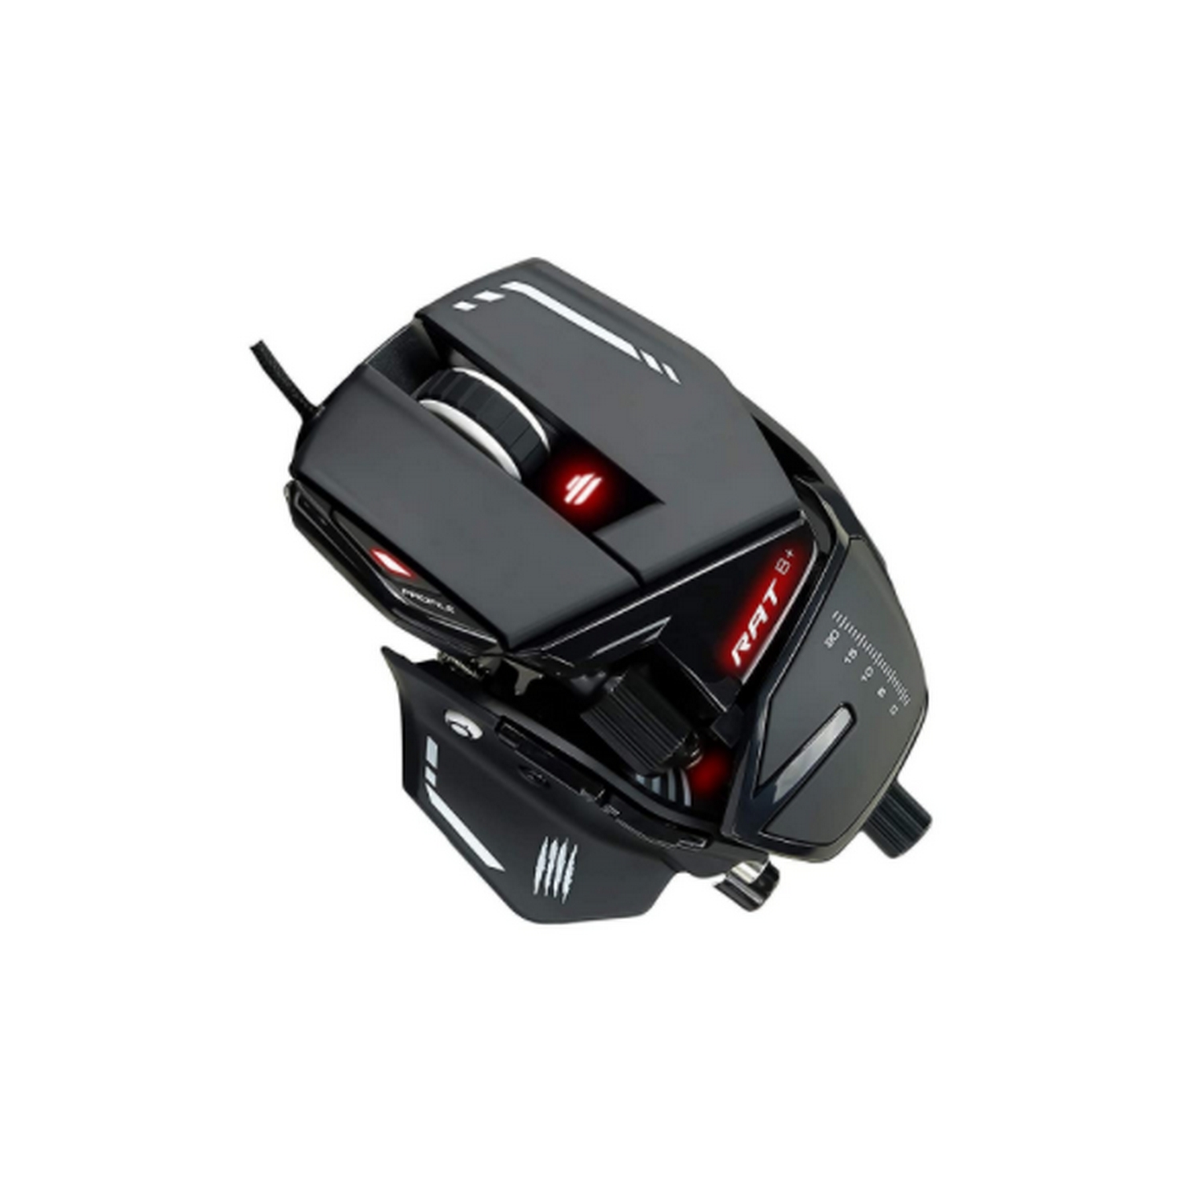 MAD CATZ Schwarz MOUSE, MR05DCINBL000-0 Gaming R.A.T. OPTICAL GAMING 8+ BL Maus